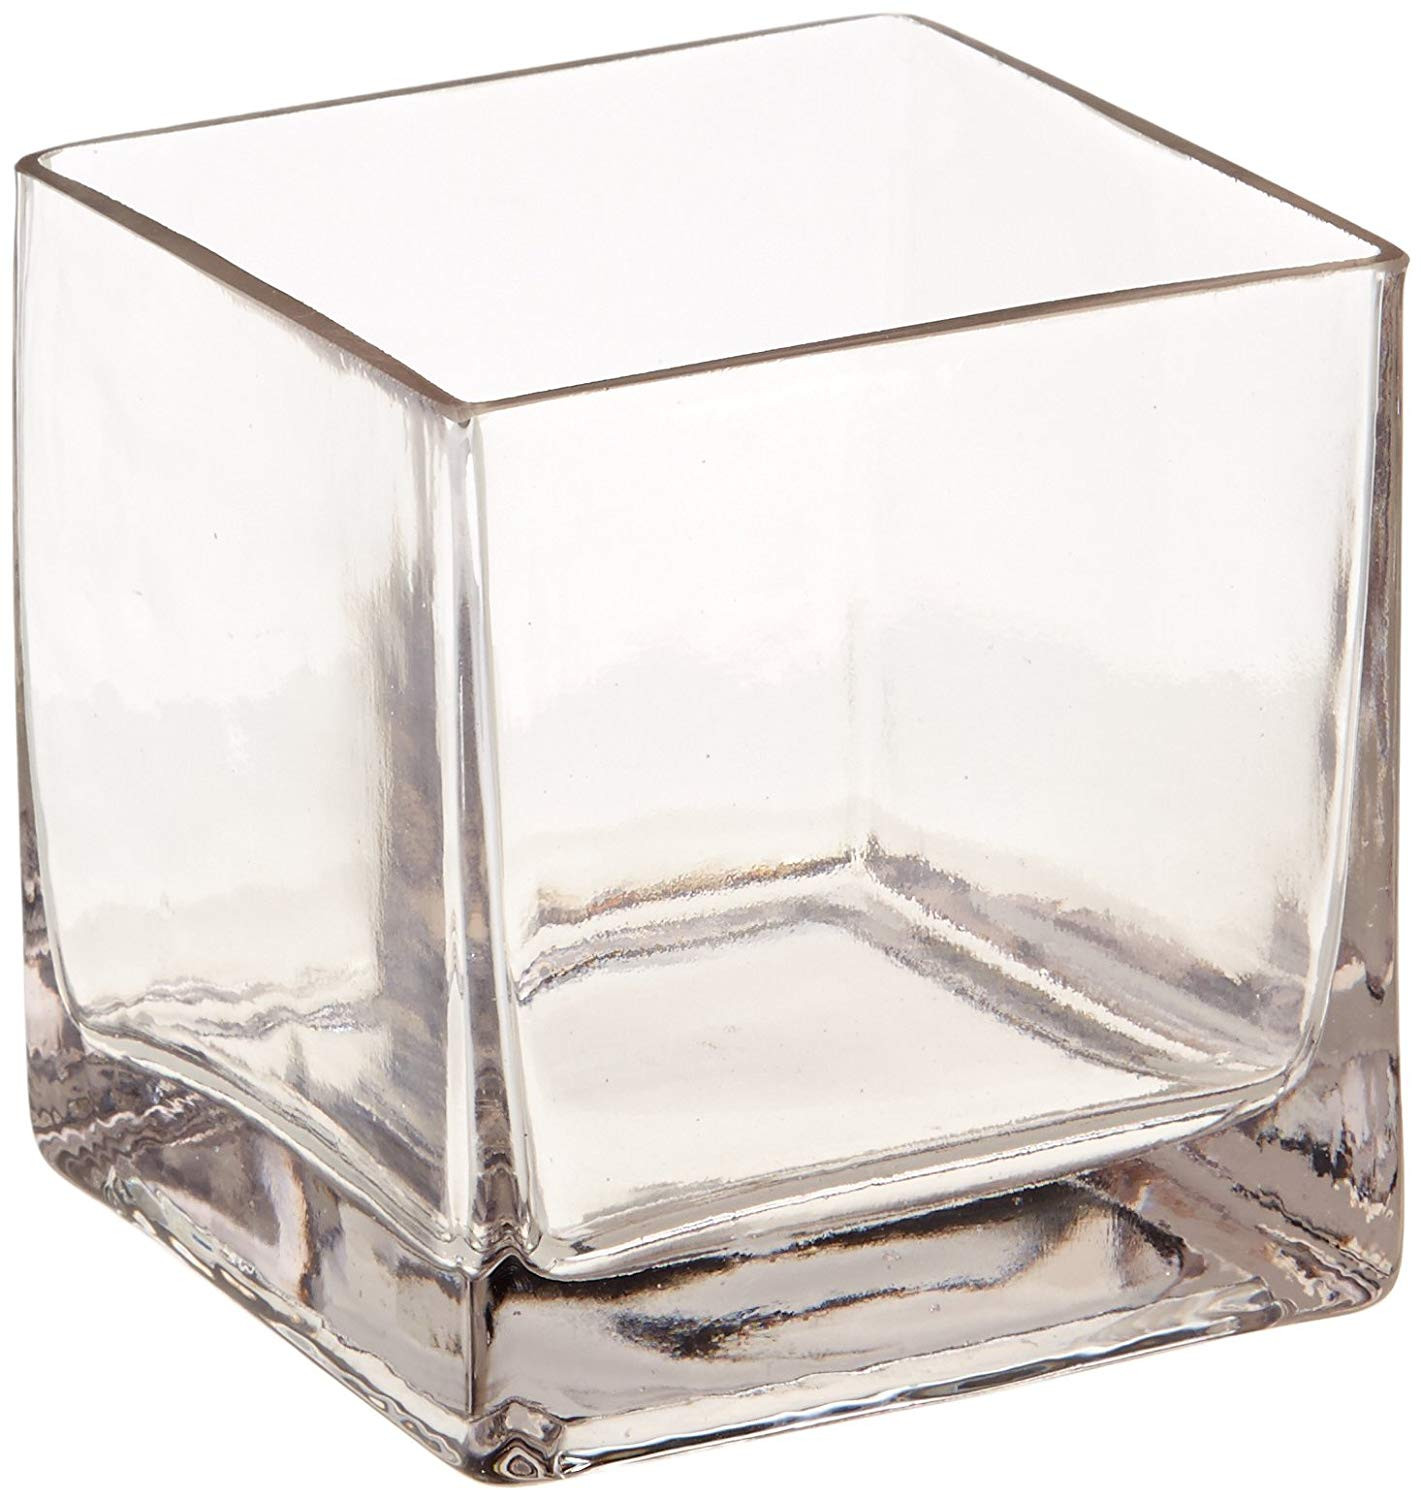 16 Fashionable Clear Glass Globe Vase 2024 free download clear glass globe vase of amazon com 12piece 4 square crystal clear glass vase home kitchen within 71 jezfmvnl sl1500